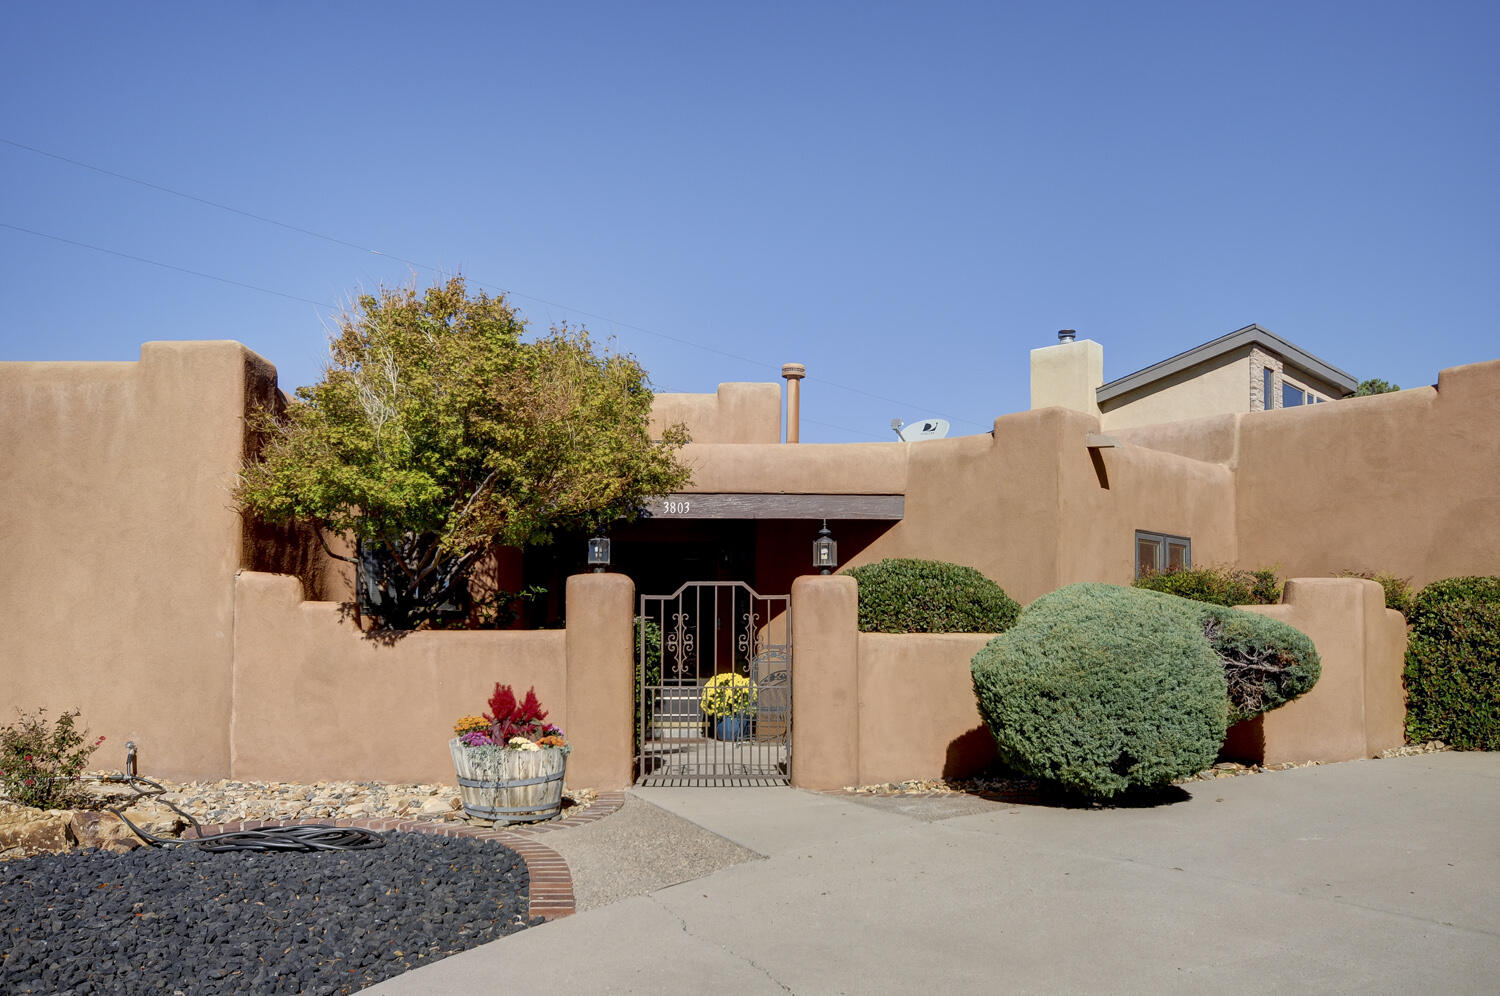 This gem is on a private lot that shares a wall with only one neighbor. Both city and mountain views with spectacular sunsets. Nearby open space, foothills trails, walking paths, playgrounds, bike trails and dog park. Front courtyard leads to entryway. So many updates. Open concept floor plan which maximizes views. Luxury vinyl floors. Pella windows and doors. High end gas fireplace. Wet bar. Remodeled kitchen w/new appliances, including induction cooktop. Marble countertops. High end soft close cabinets. 2 walk in closets off Primary bedroom. Lots of storage. 2 water heaters. Refrigerated air. Owned solar, 27 panels generate over 10,000 kWh per yr which results in $8 monthly electric bills. Large storage sheds in backyard. Windsor shutters, come & see! There are steps to LR, DR, & garage